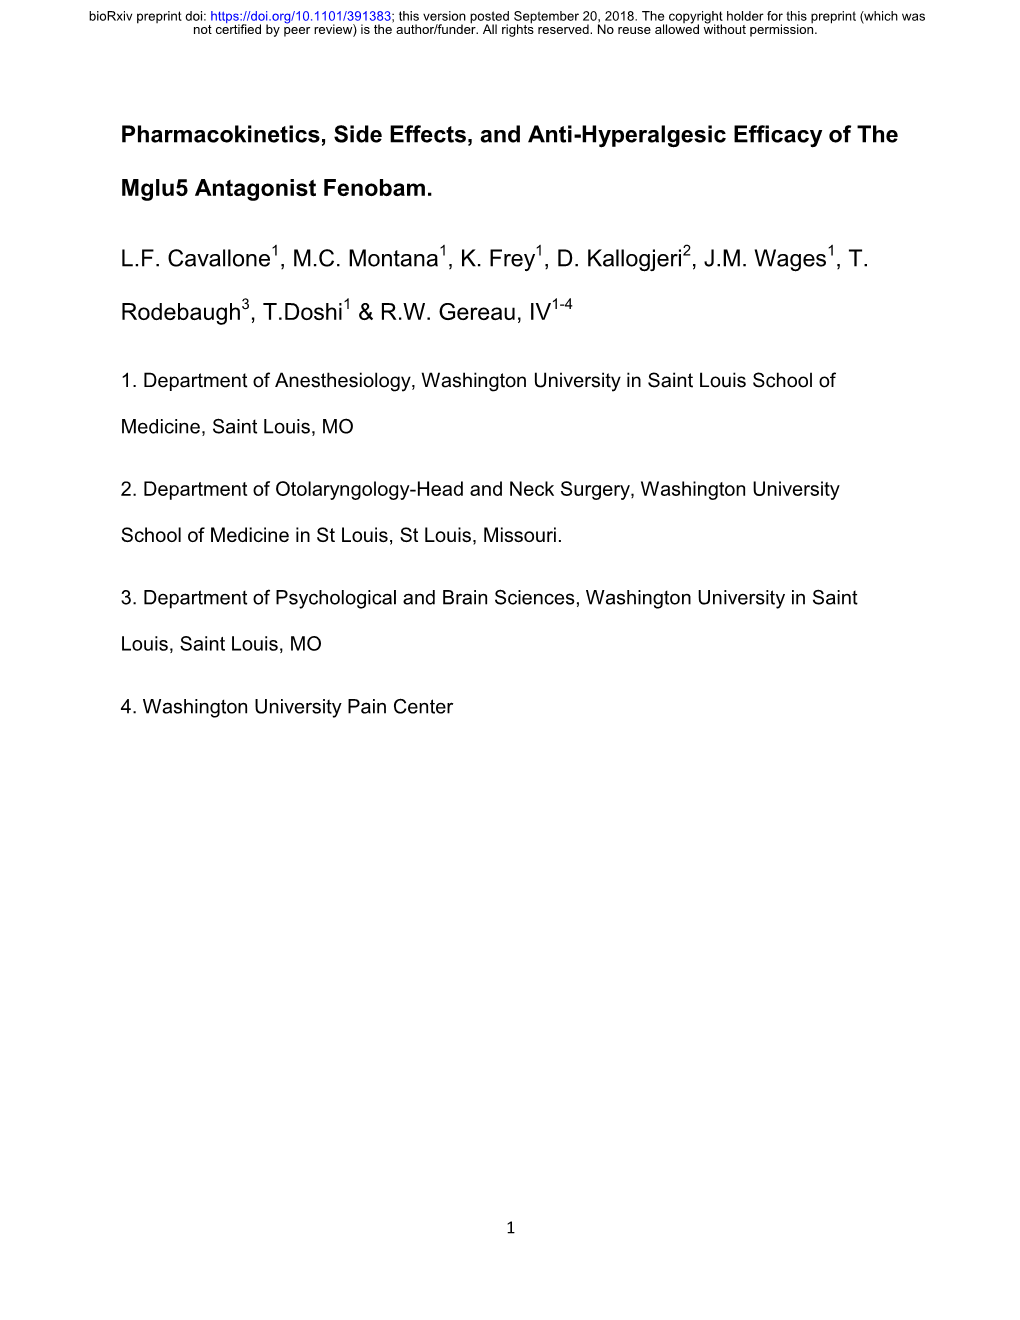 Pharmacokinetics, Side Effects, and Anti-Hyperalgesic Efficacy of the Mglu5 Antagonist Fenobam